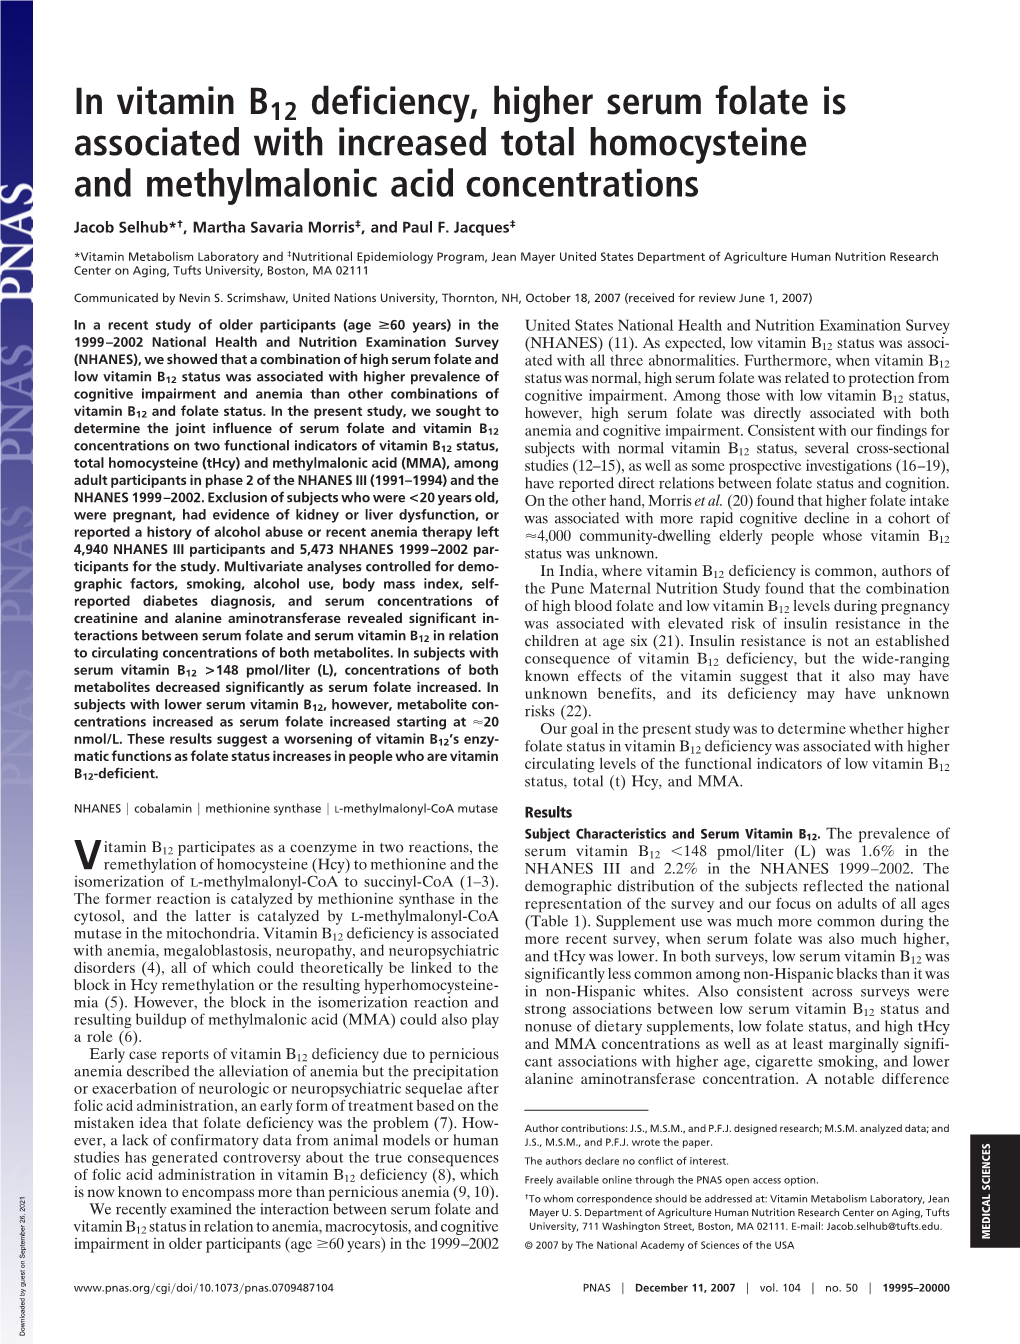 In Vitamin B12 Deficiency, Higher Serum Folate Is Associated with Increased Total Homocysteine and Methylmalonic Acid Concentrations